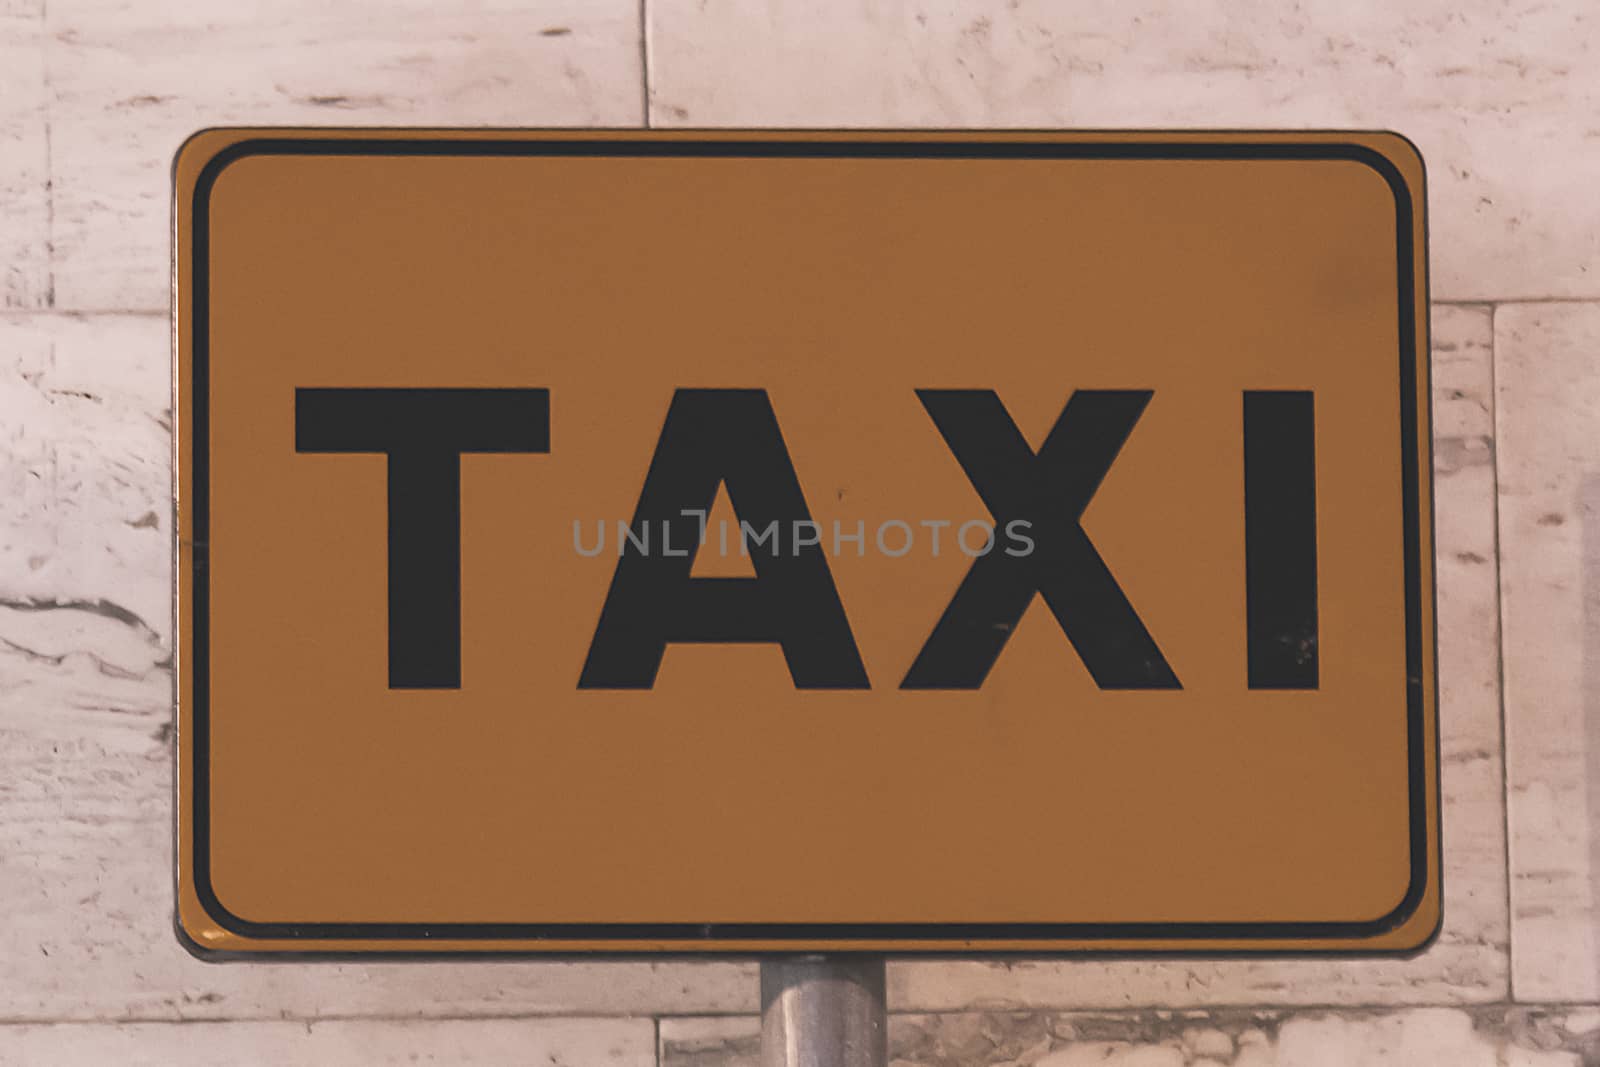 sign information to the taxi rank in town